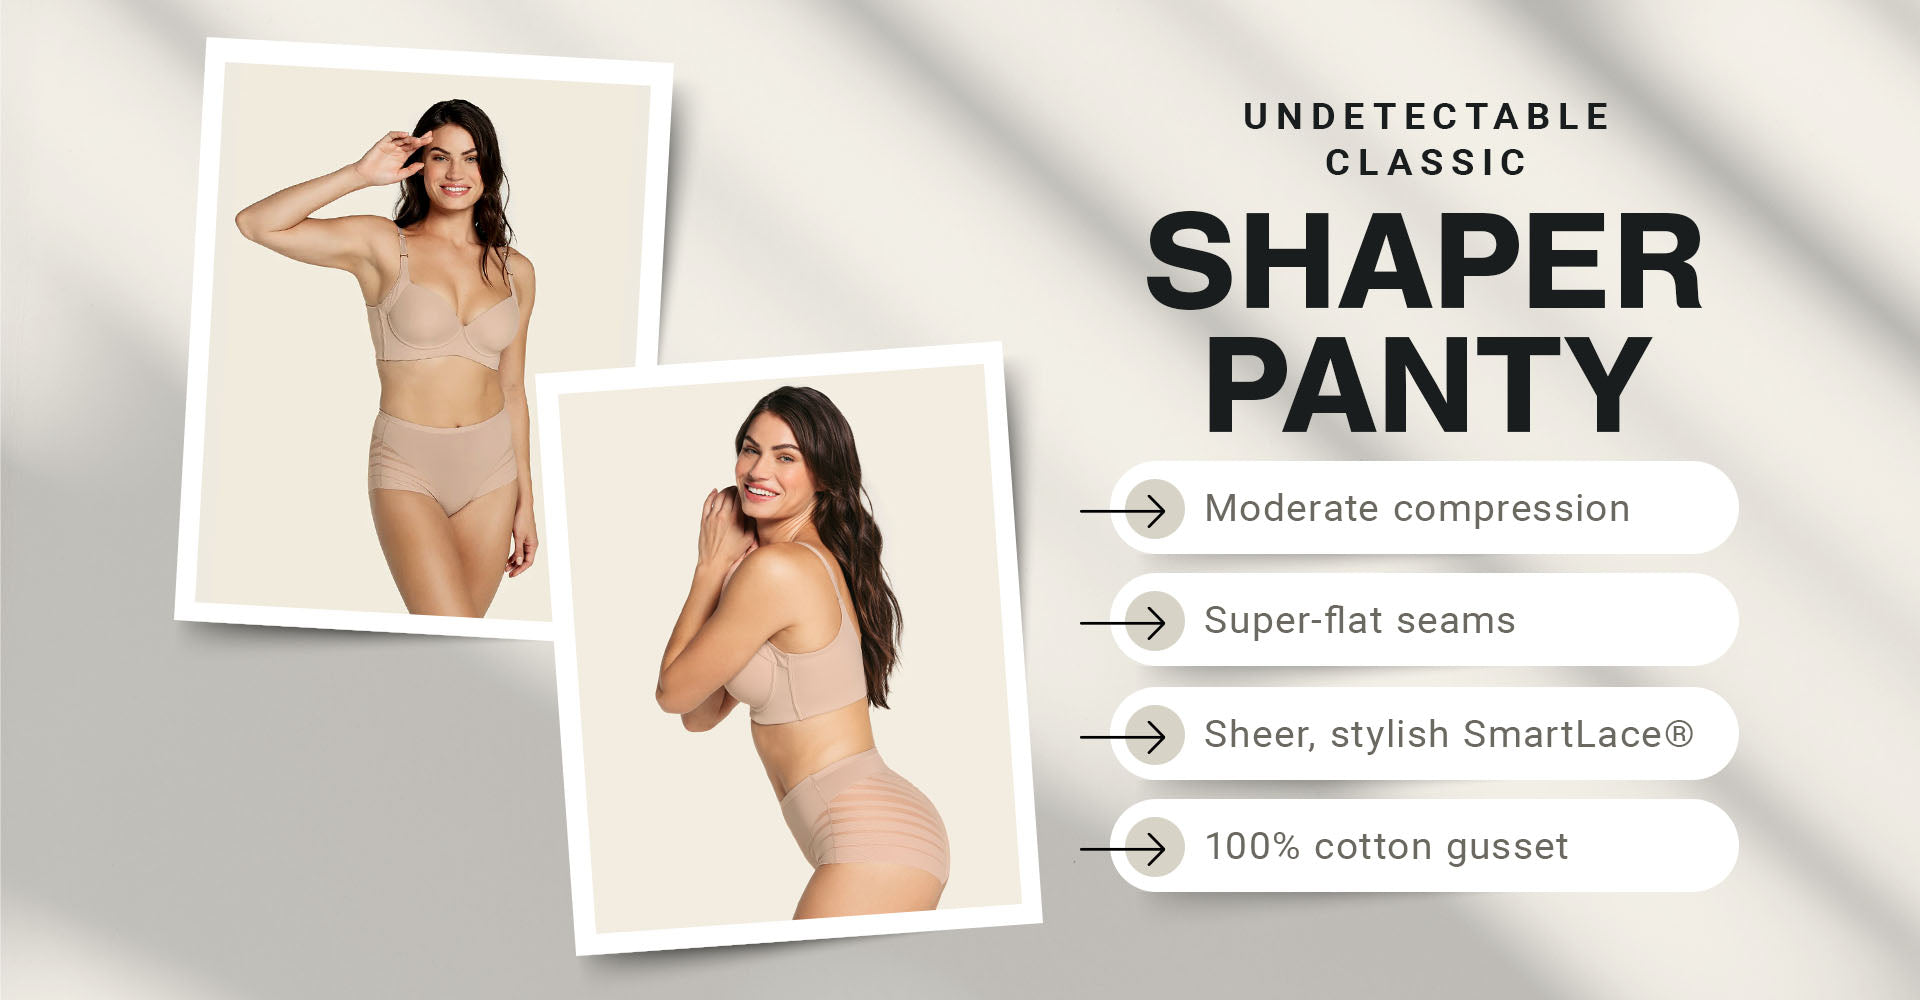 undetectable classic shaper